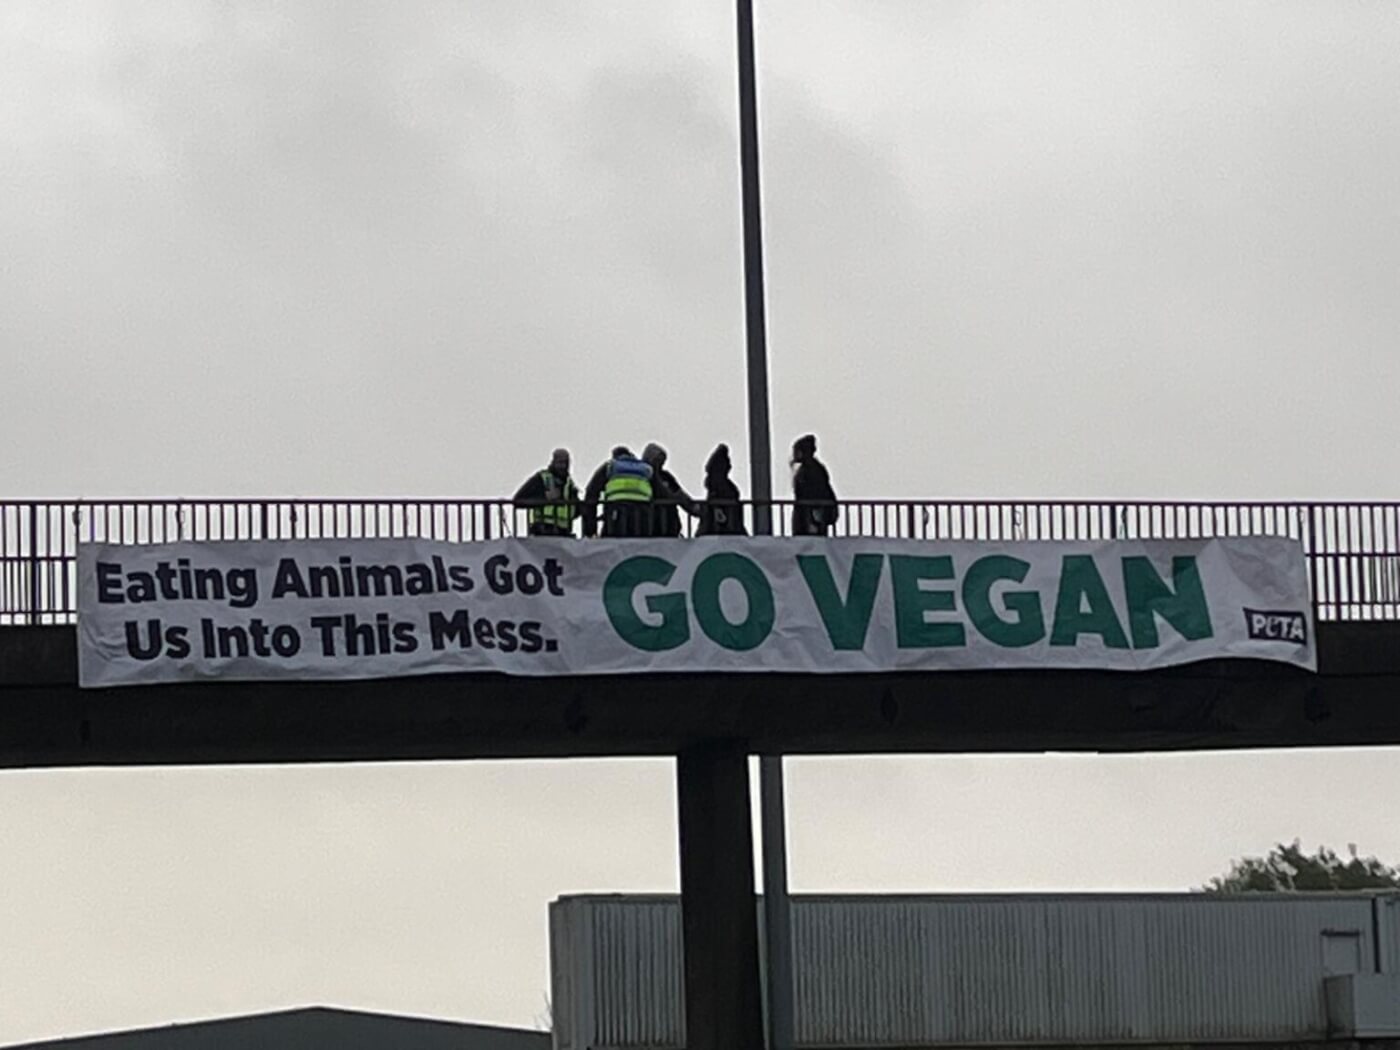 Activists hang a banner over the m8 motorway that says "Eating animals got us into this mess. Go vegan!"